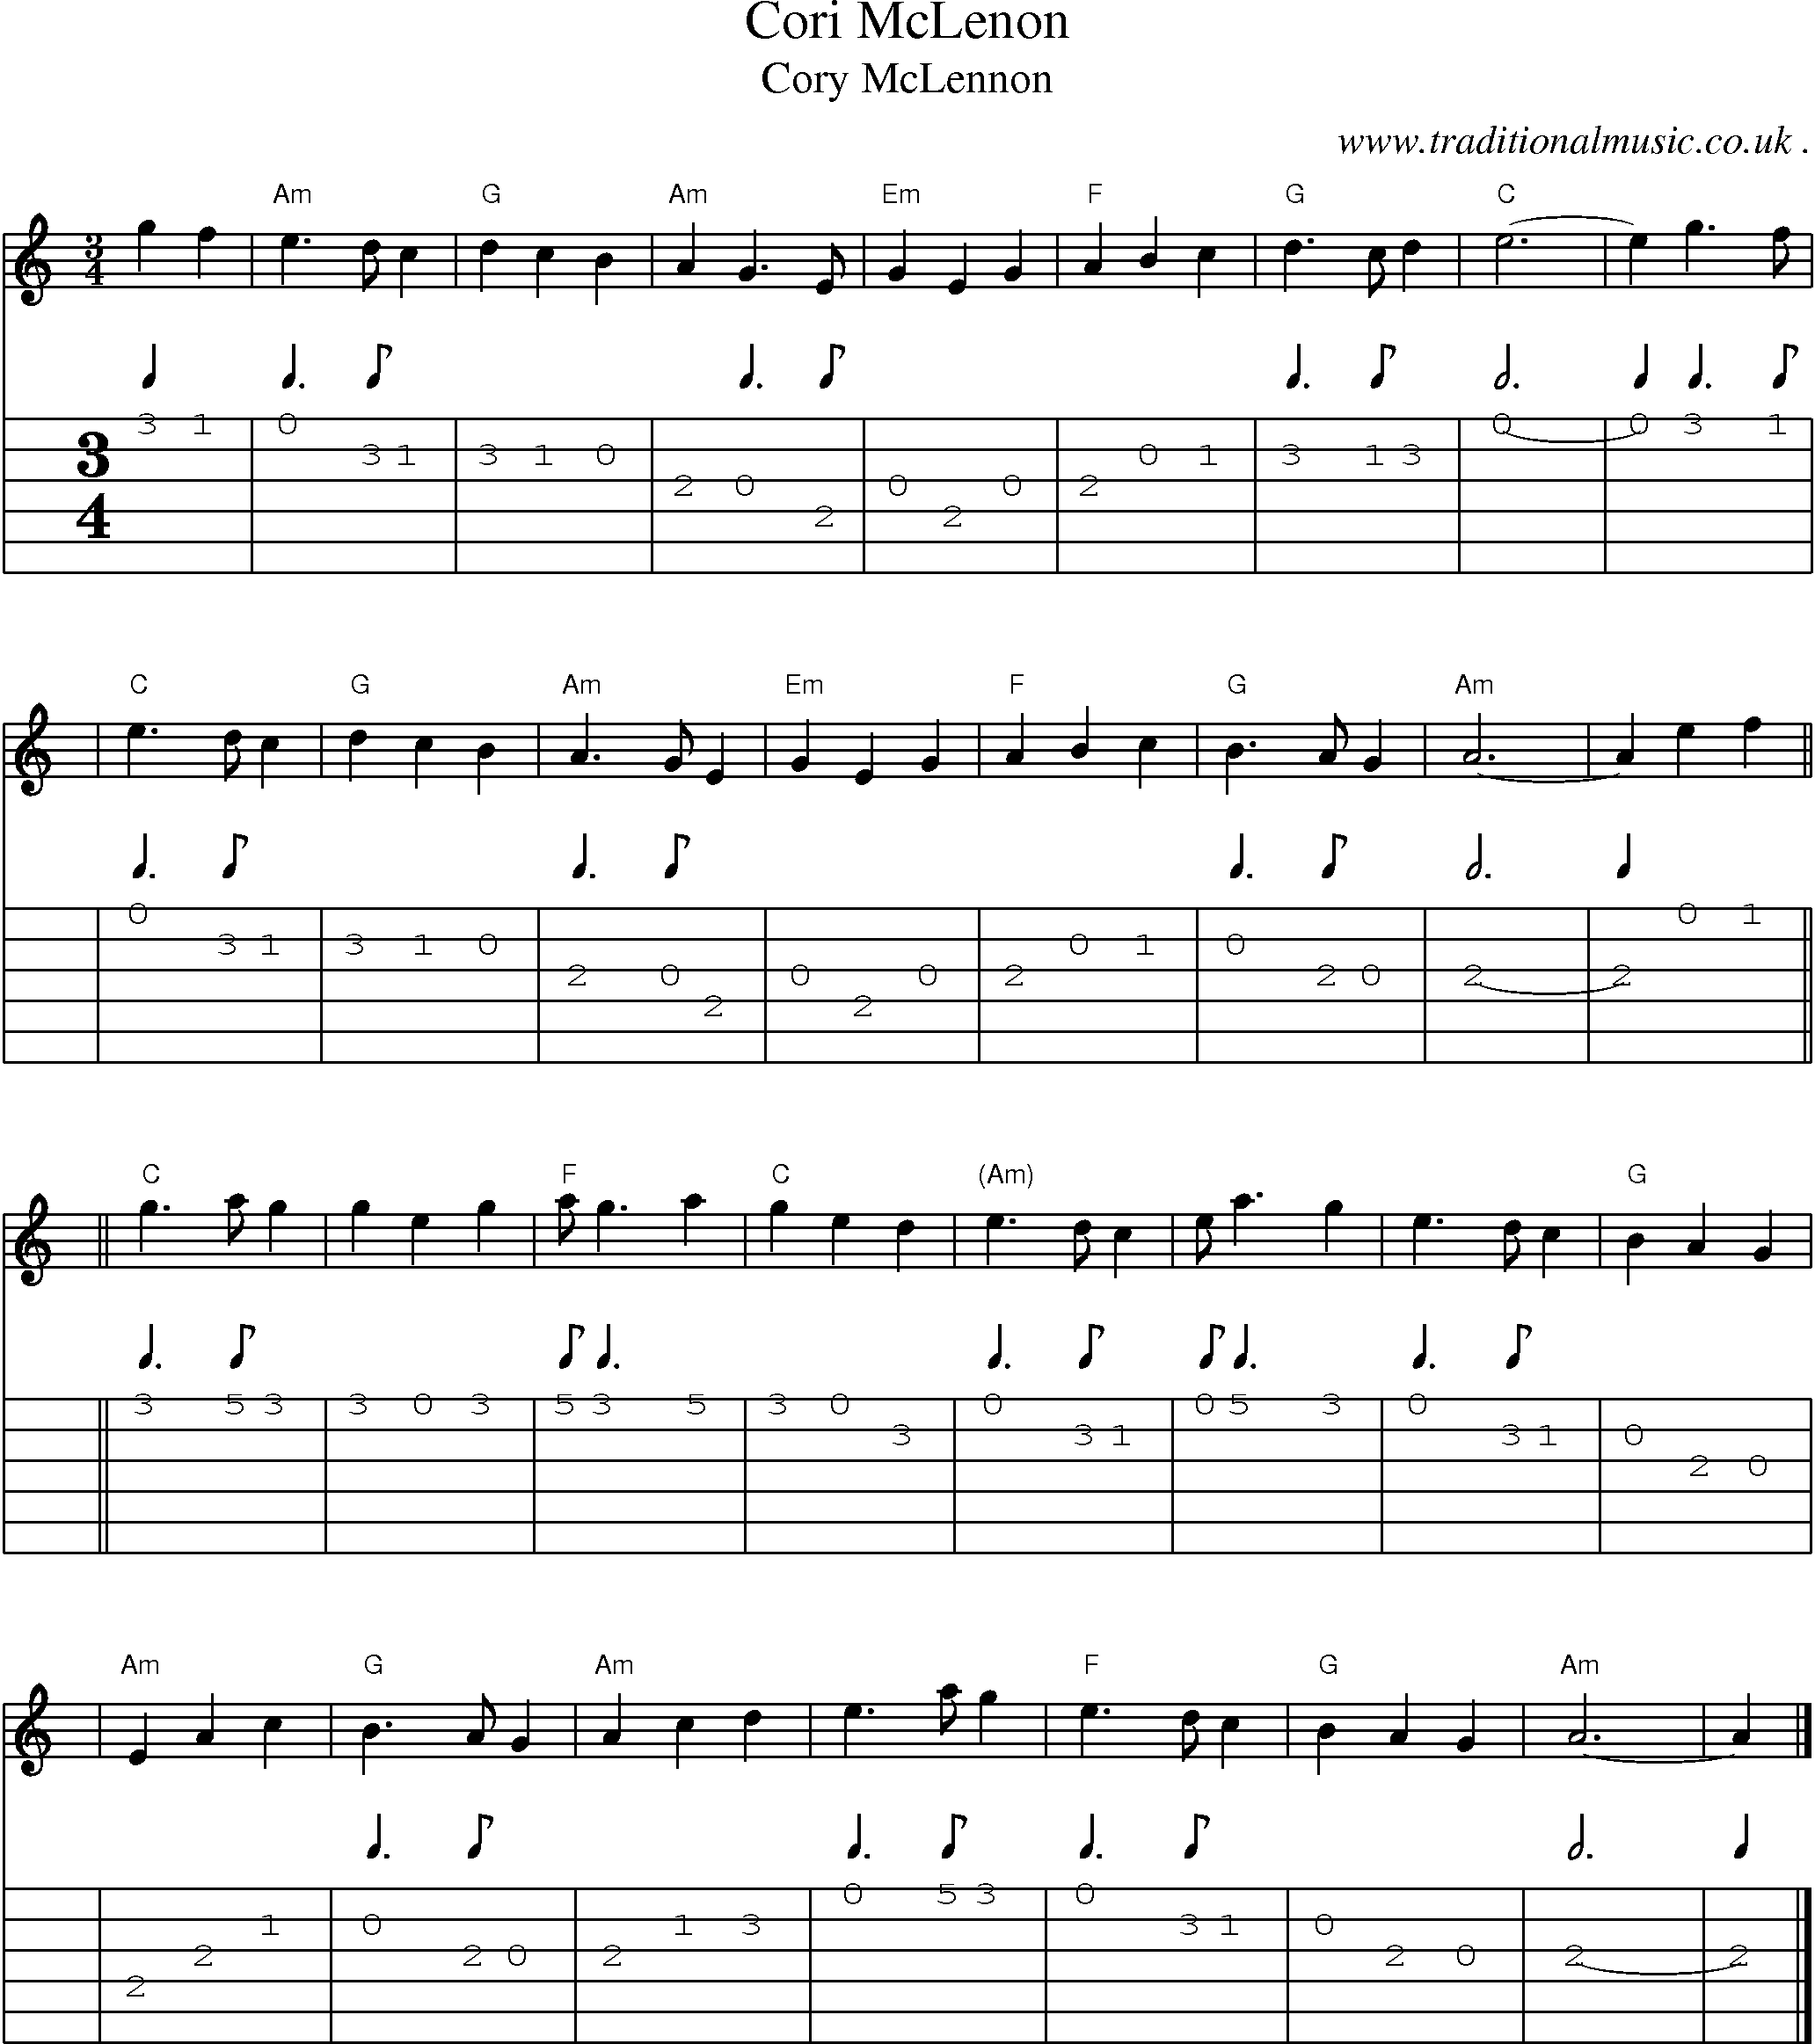 Sheet-music  score, Chords and Guitar Tabs for Cori Mclenon